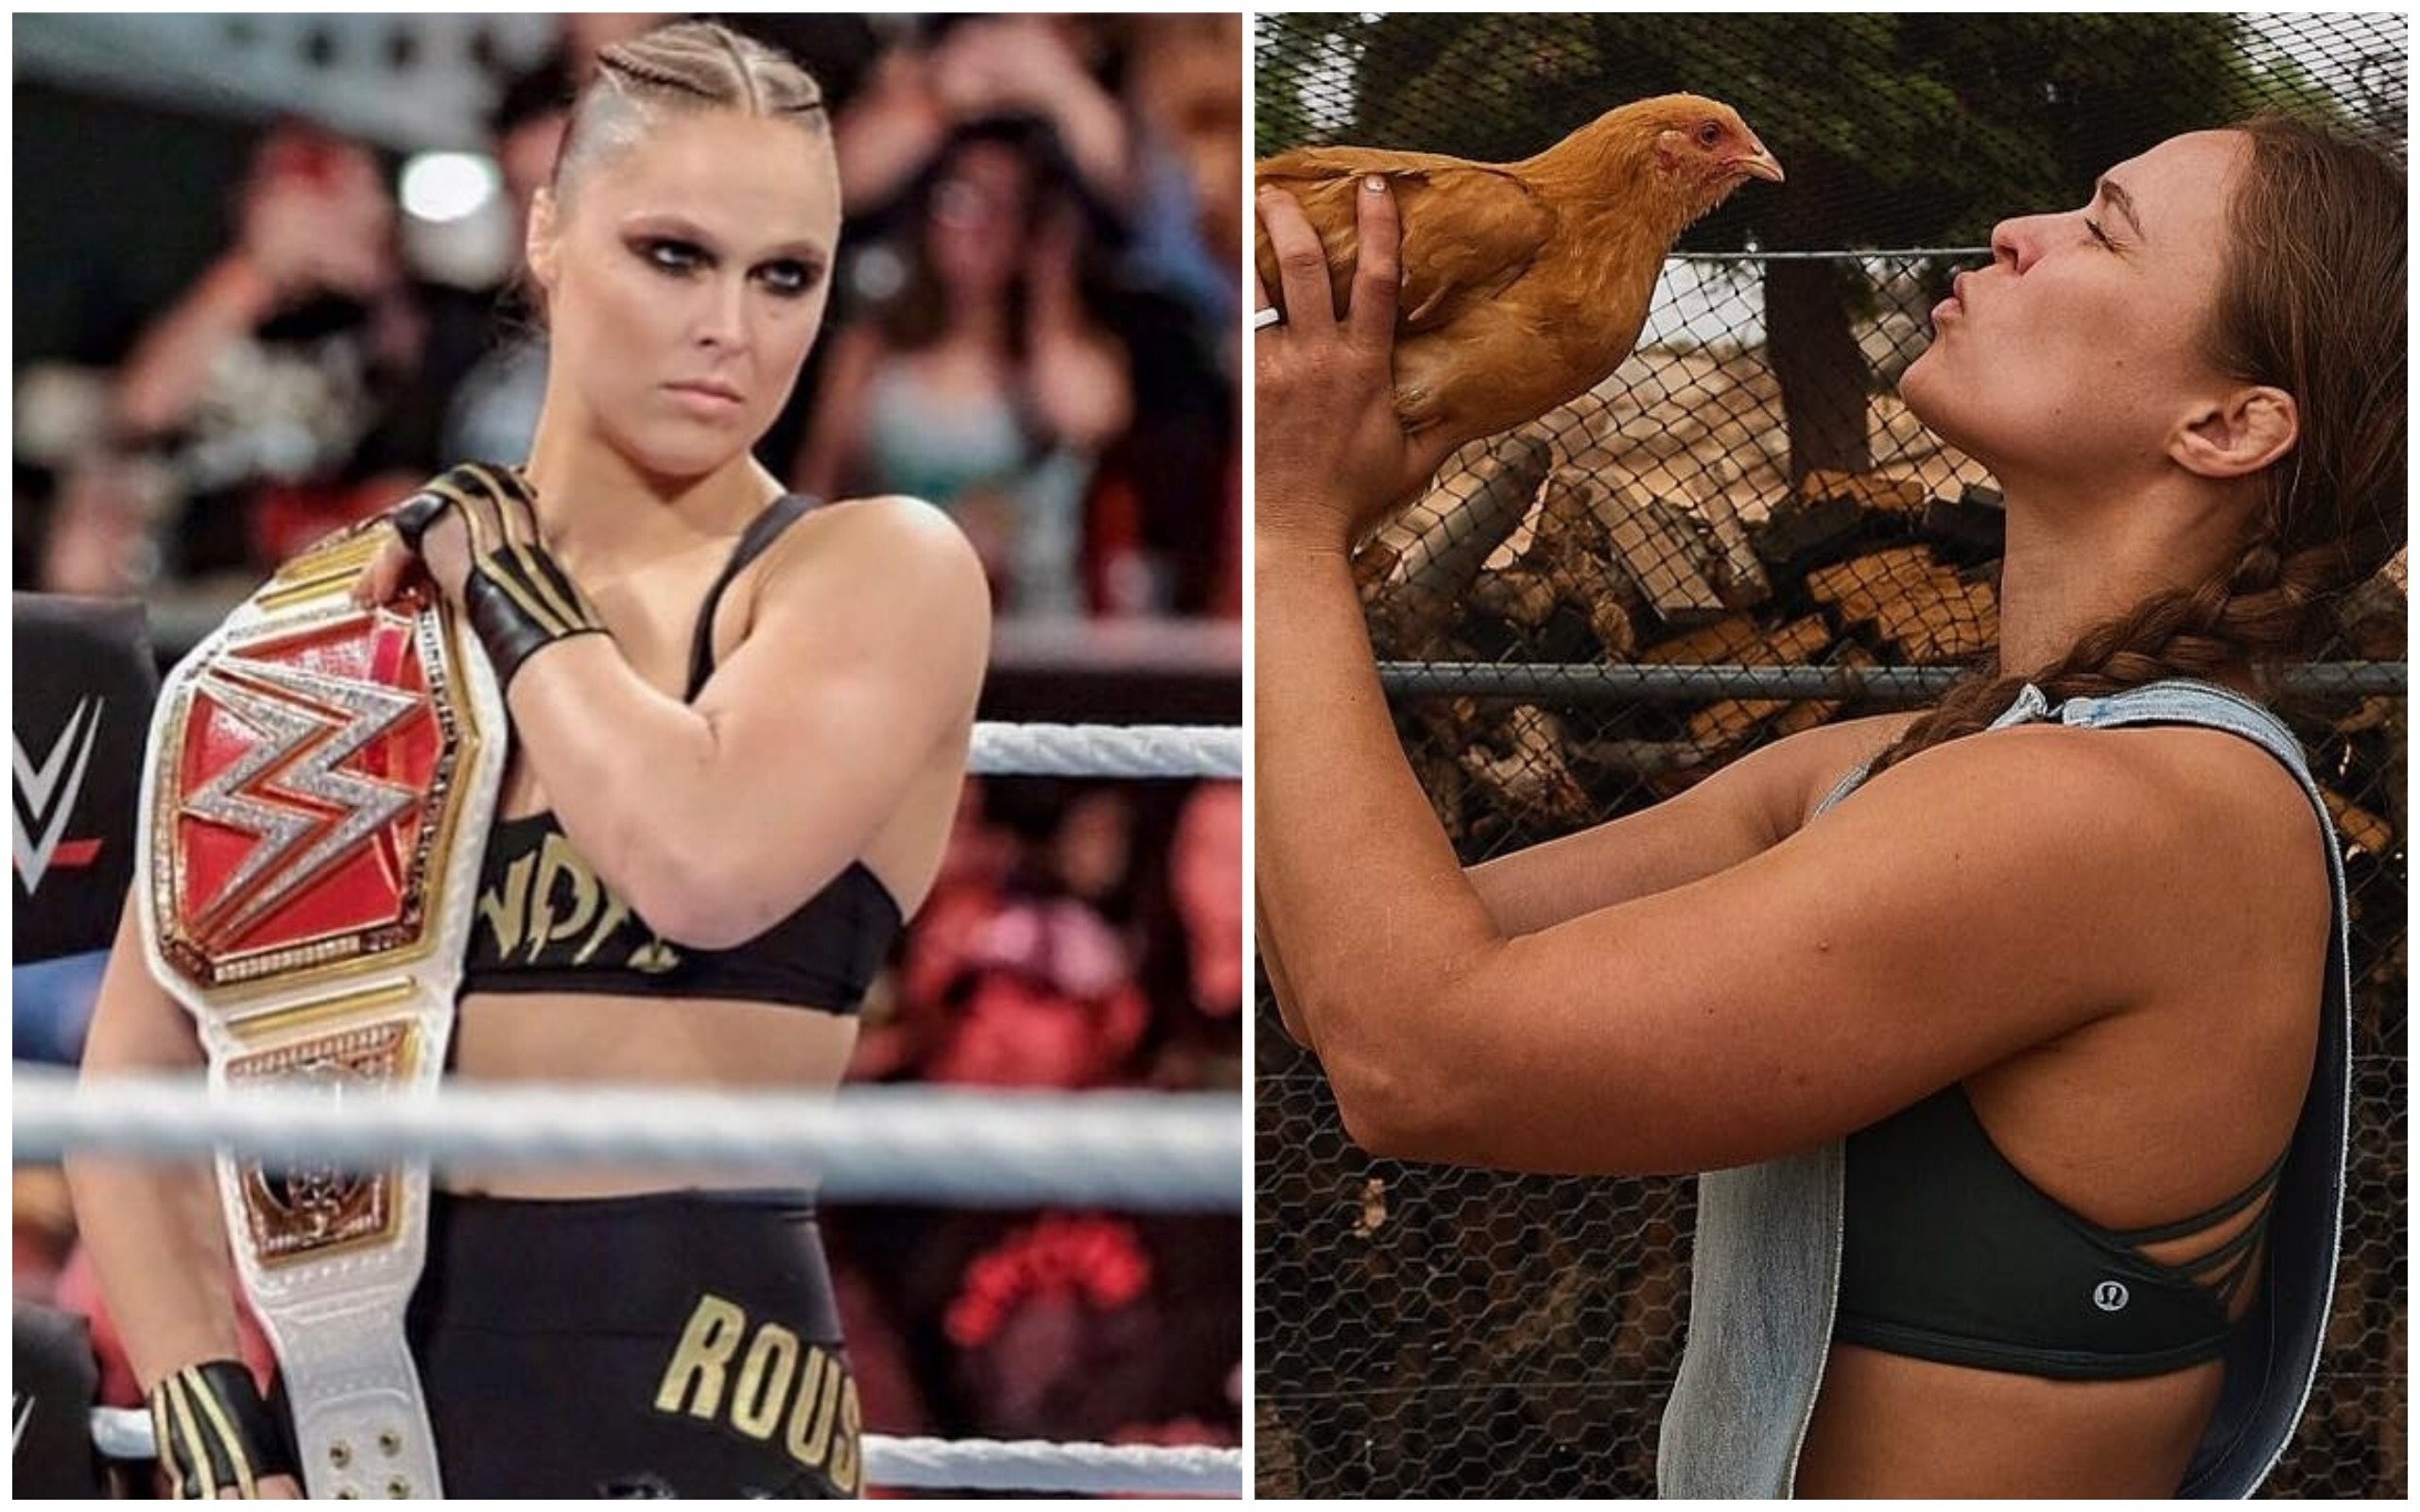 Ronda Rousey has built a reputation as a fierce fighter in the UFC and WWE worlds. Now she feeds chicken while avoiding fans. Here’s a look at her double life. Photo: @rondarousey/Instagram